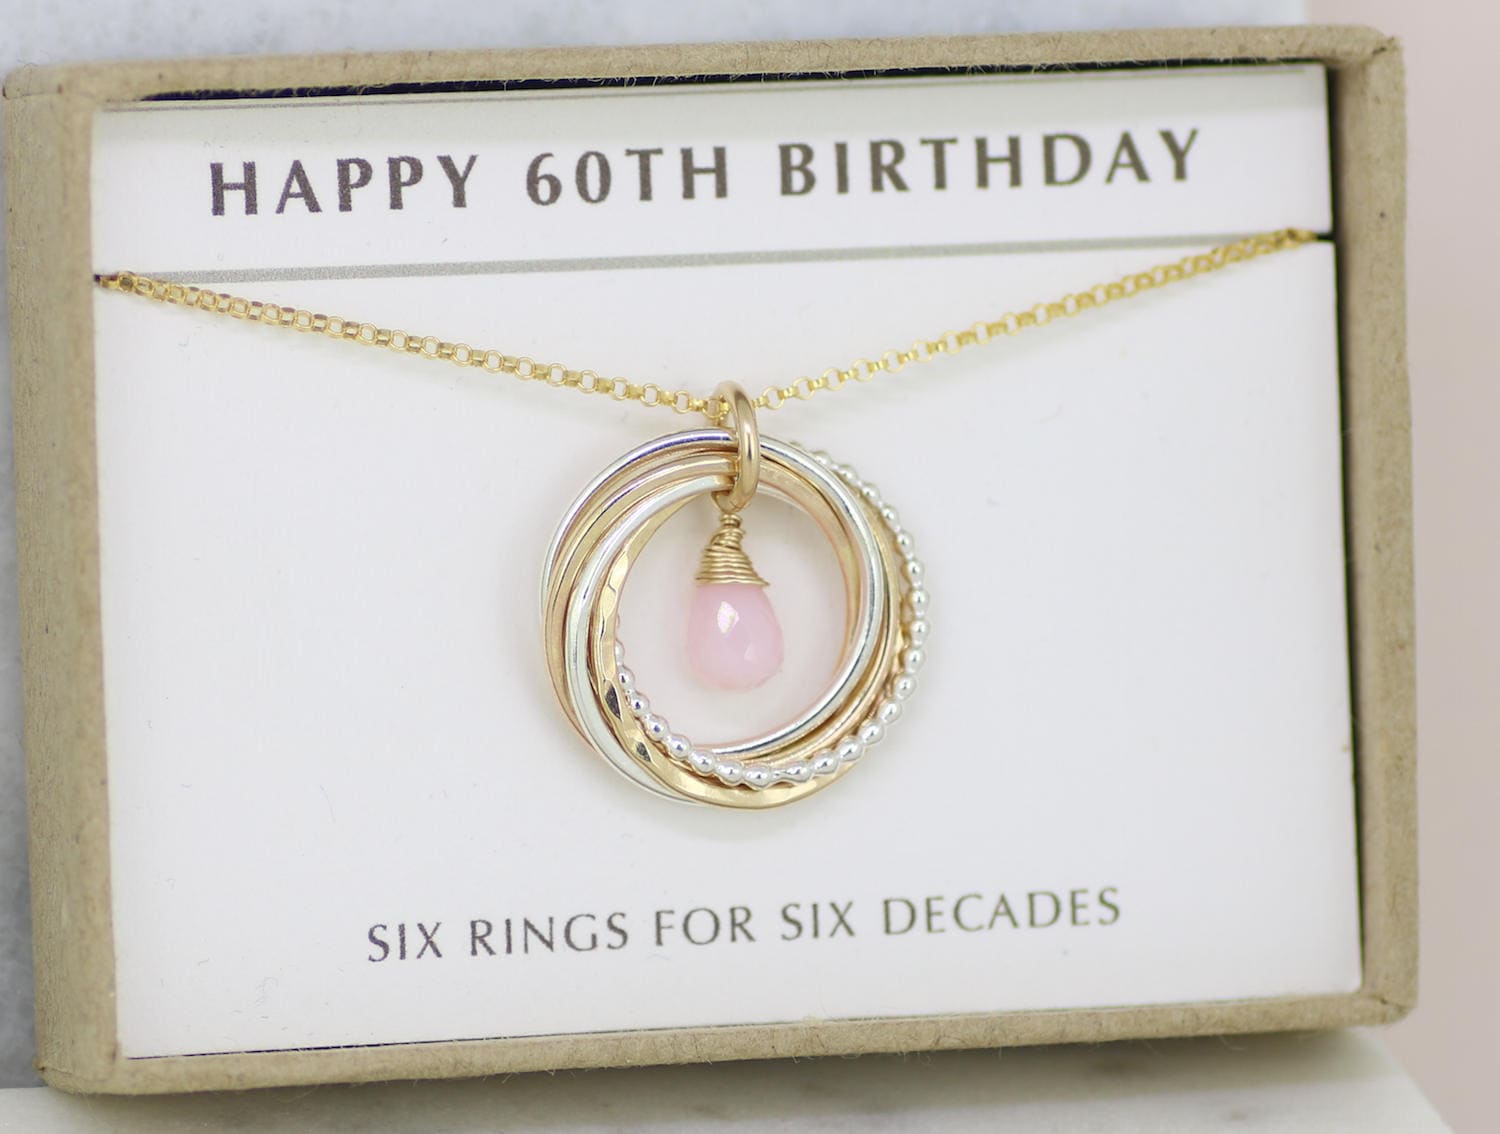 60th birthday gifts for women pink opal necklace for October